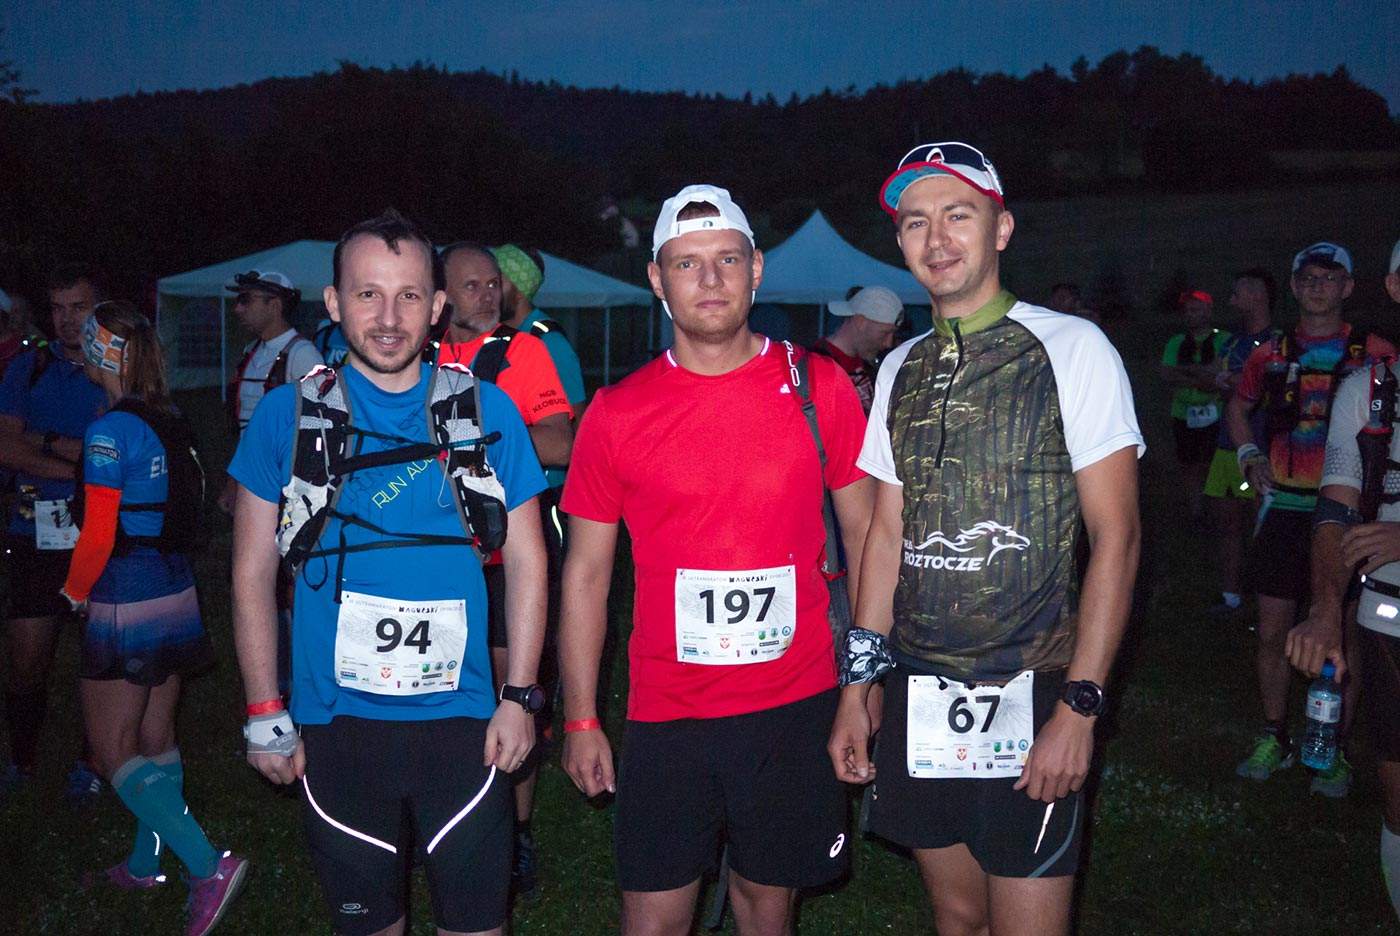 Me, Krzysztof and Łukasz just befor the start of the race - 2017 Ultramaraton Magurski